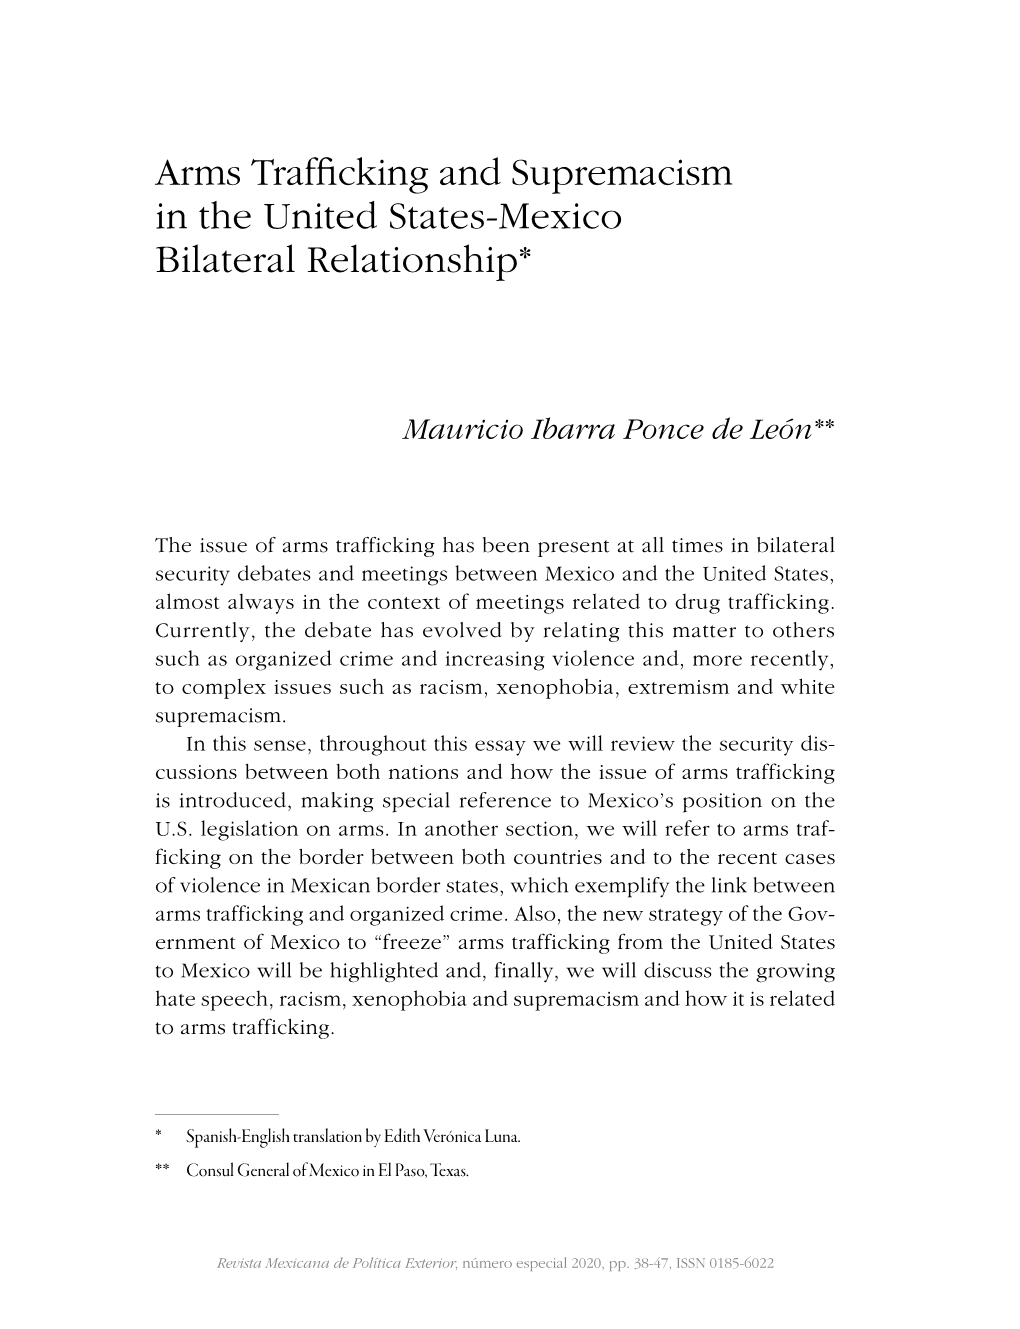 Arms Trafficking and Supremacism in the United States-Mexico Bilateral Relationship*